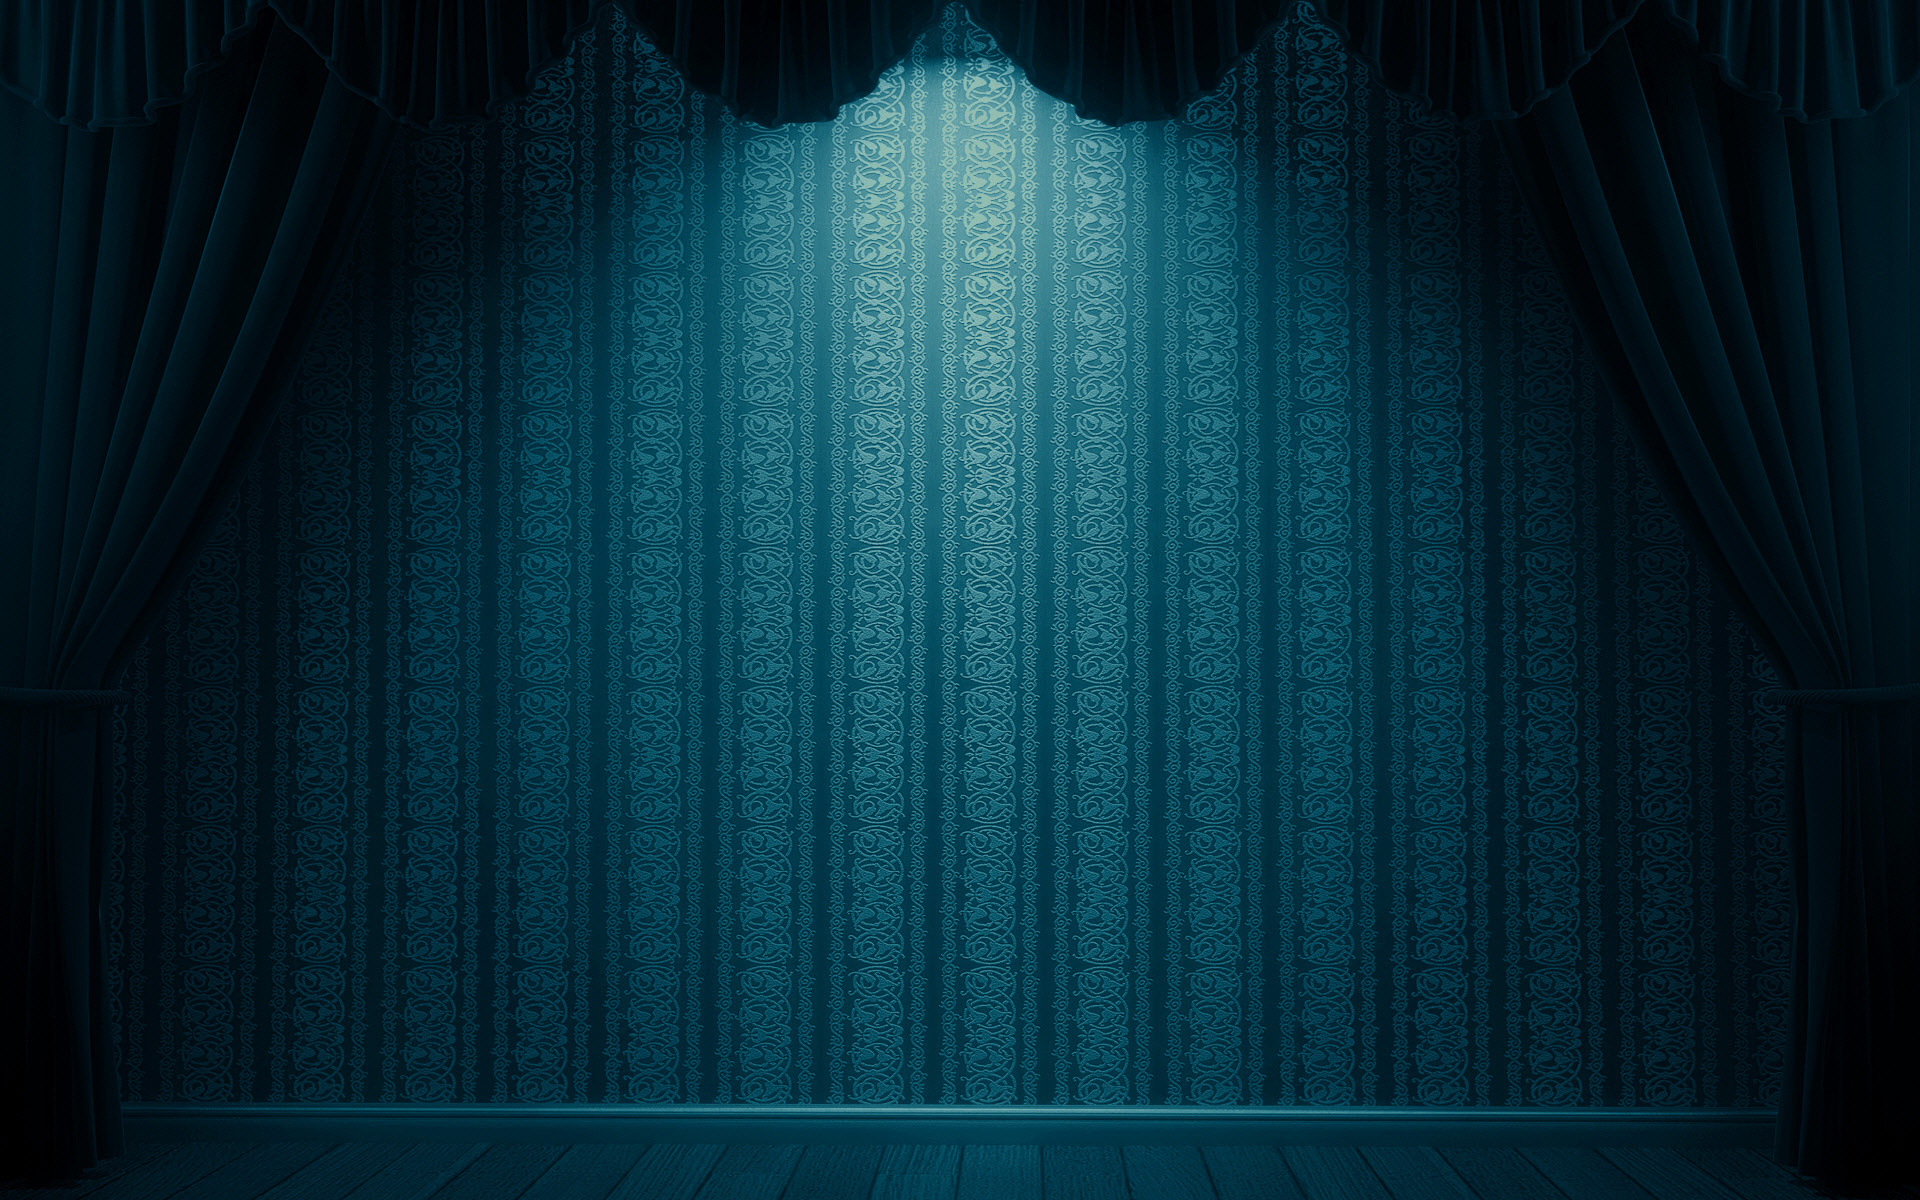 Theatre stage wallpaper, Captivating visuals, Dramatic ambiance, Artistic expression, 1920x1200 HD Desktop